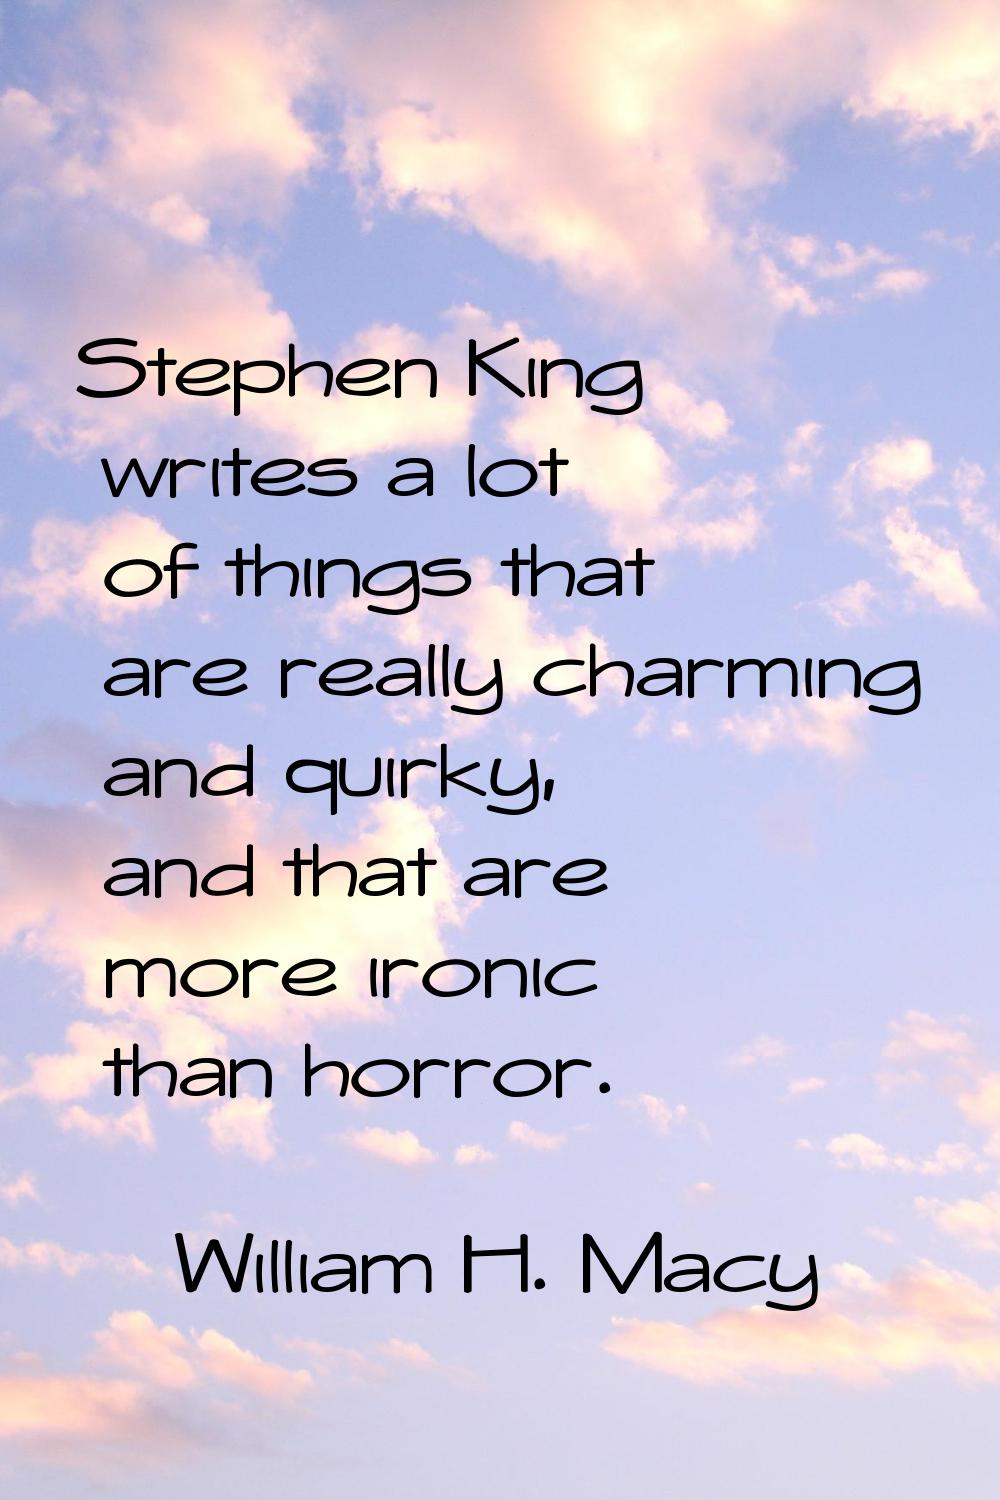 Stephen King writes a lot of things that are really charming and quirky, and that are more ironic t